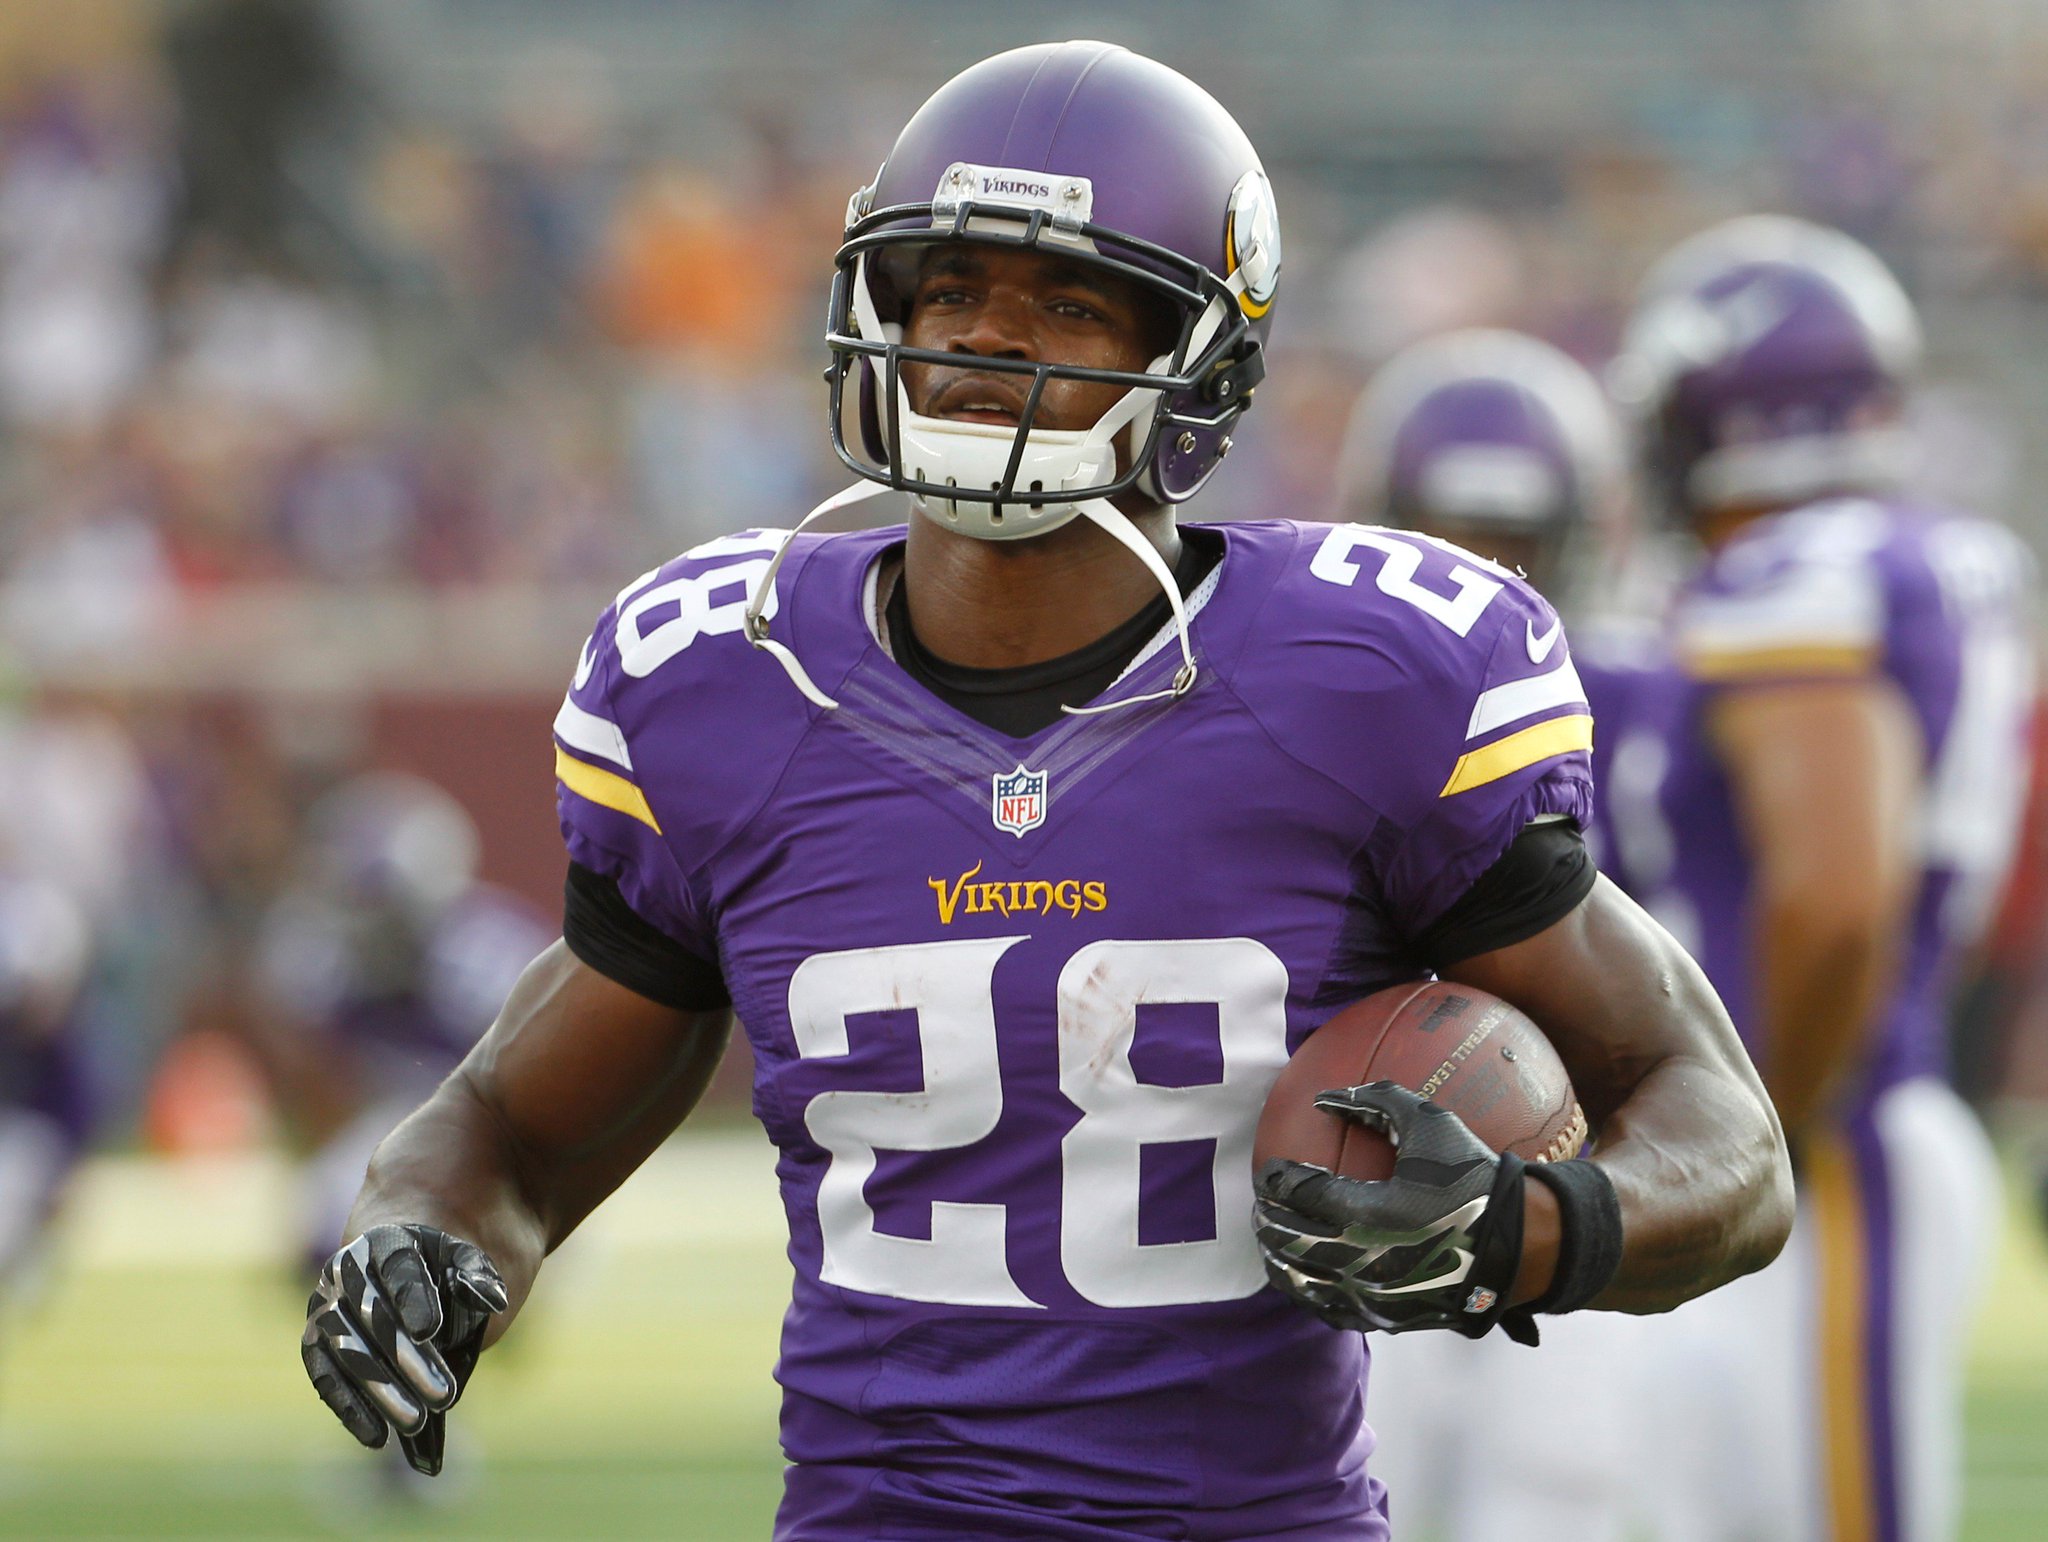 Happy Birthday to Adrian Peterson, who turns 32 today! 